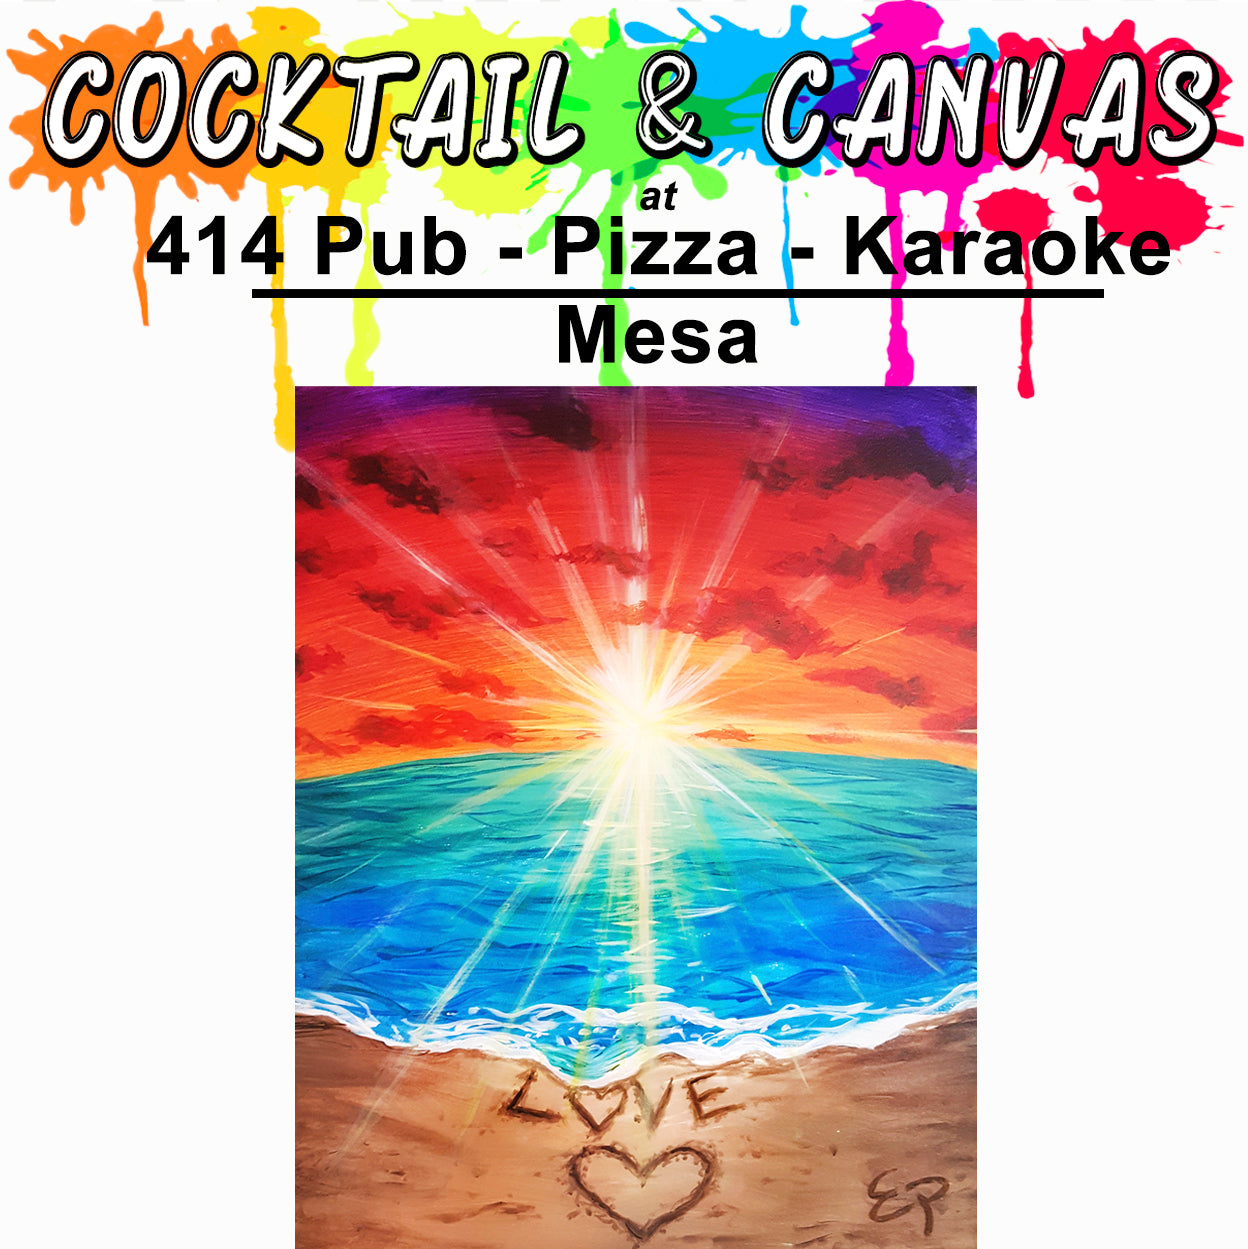 "Love On The Beach" Paint and Sip at 414 Pub - Pizza - Karaoke on Sat, Sep 9 at 1pm